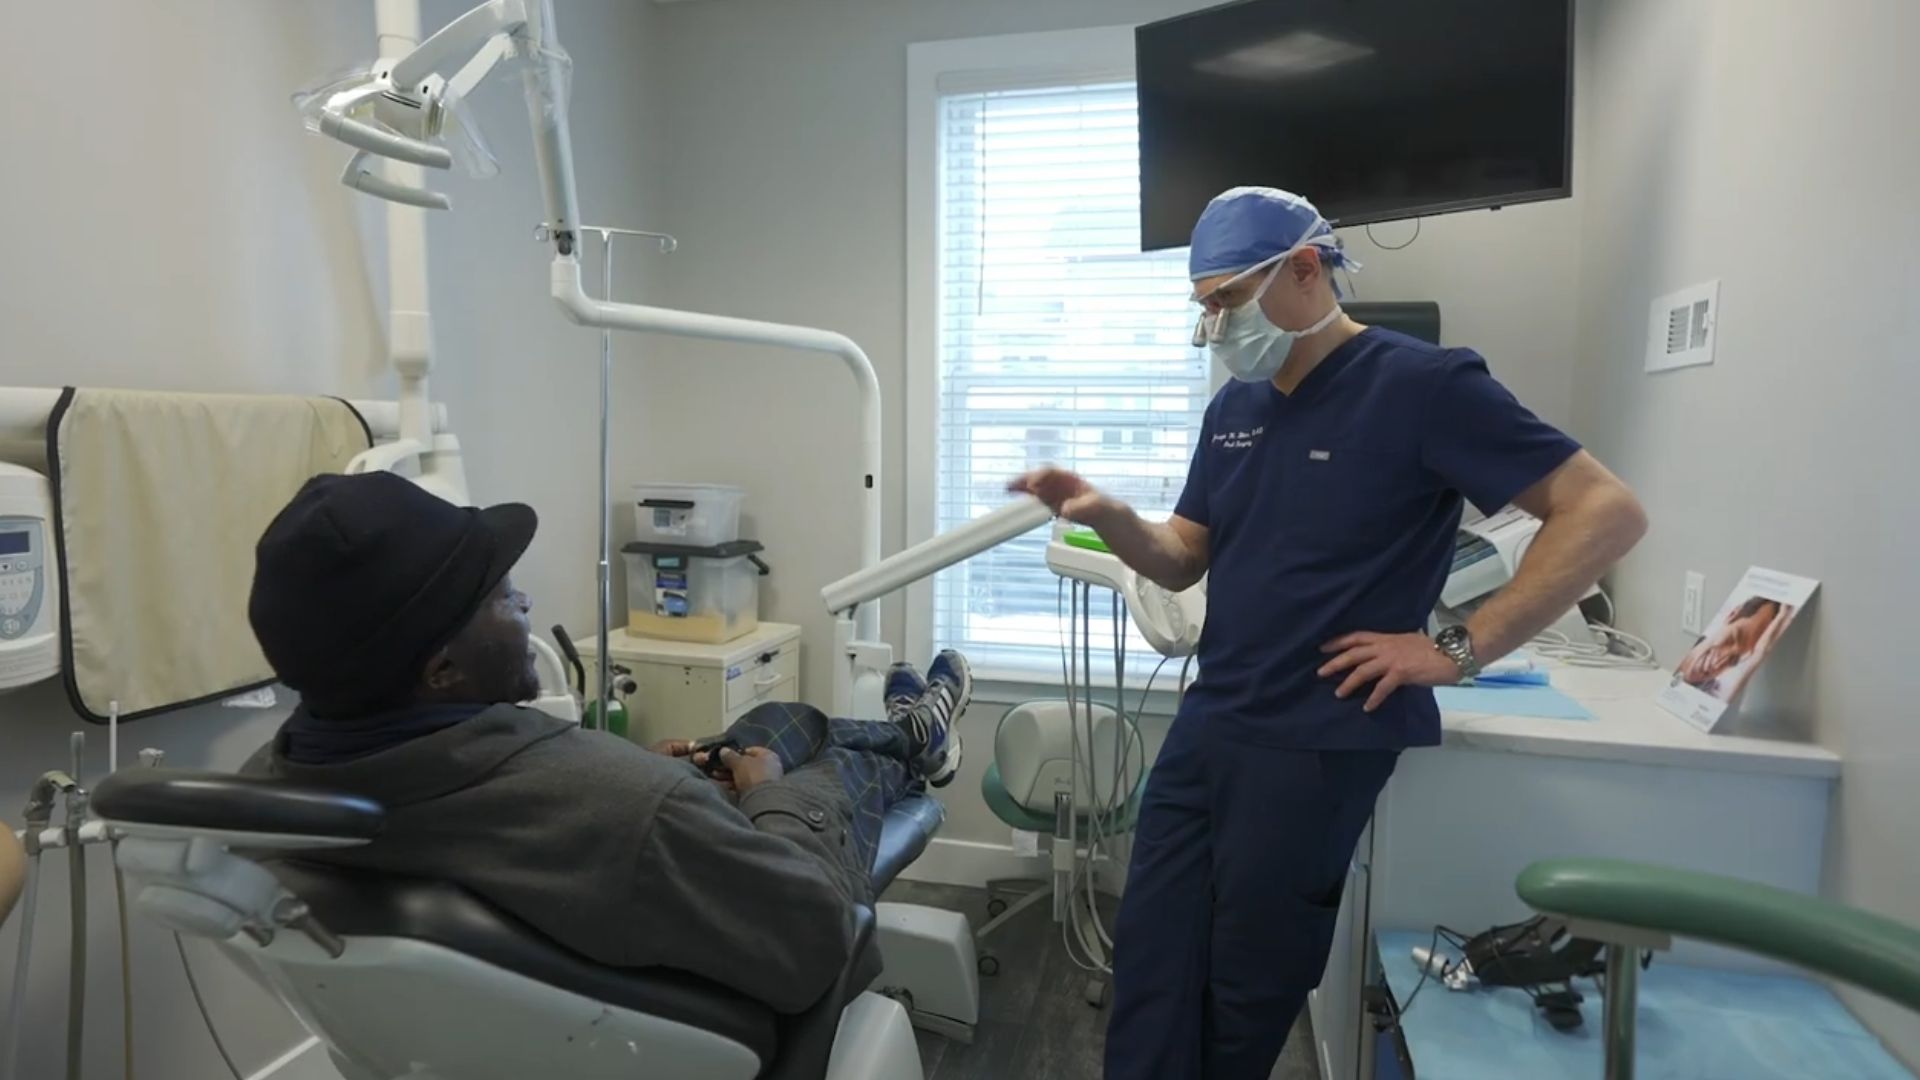 Dr Blum Consults With Implant Patient